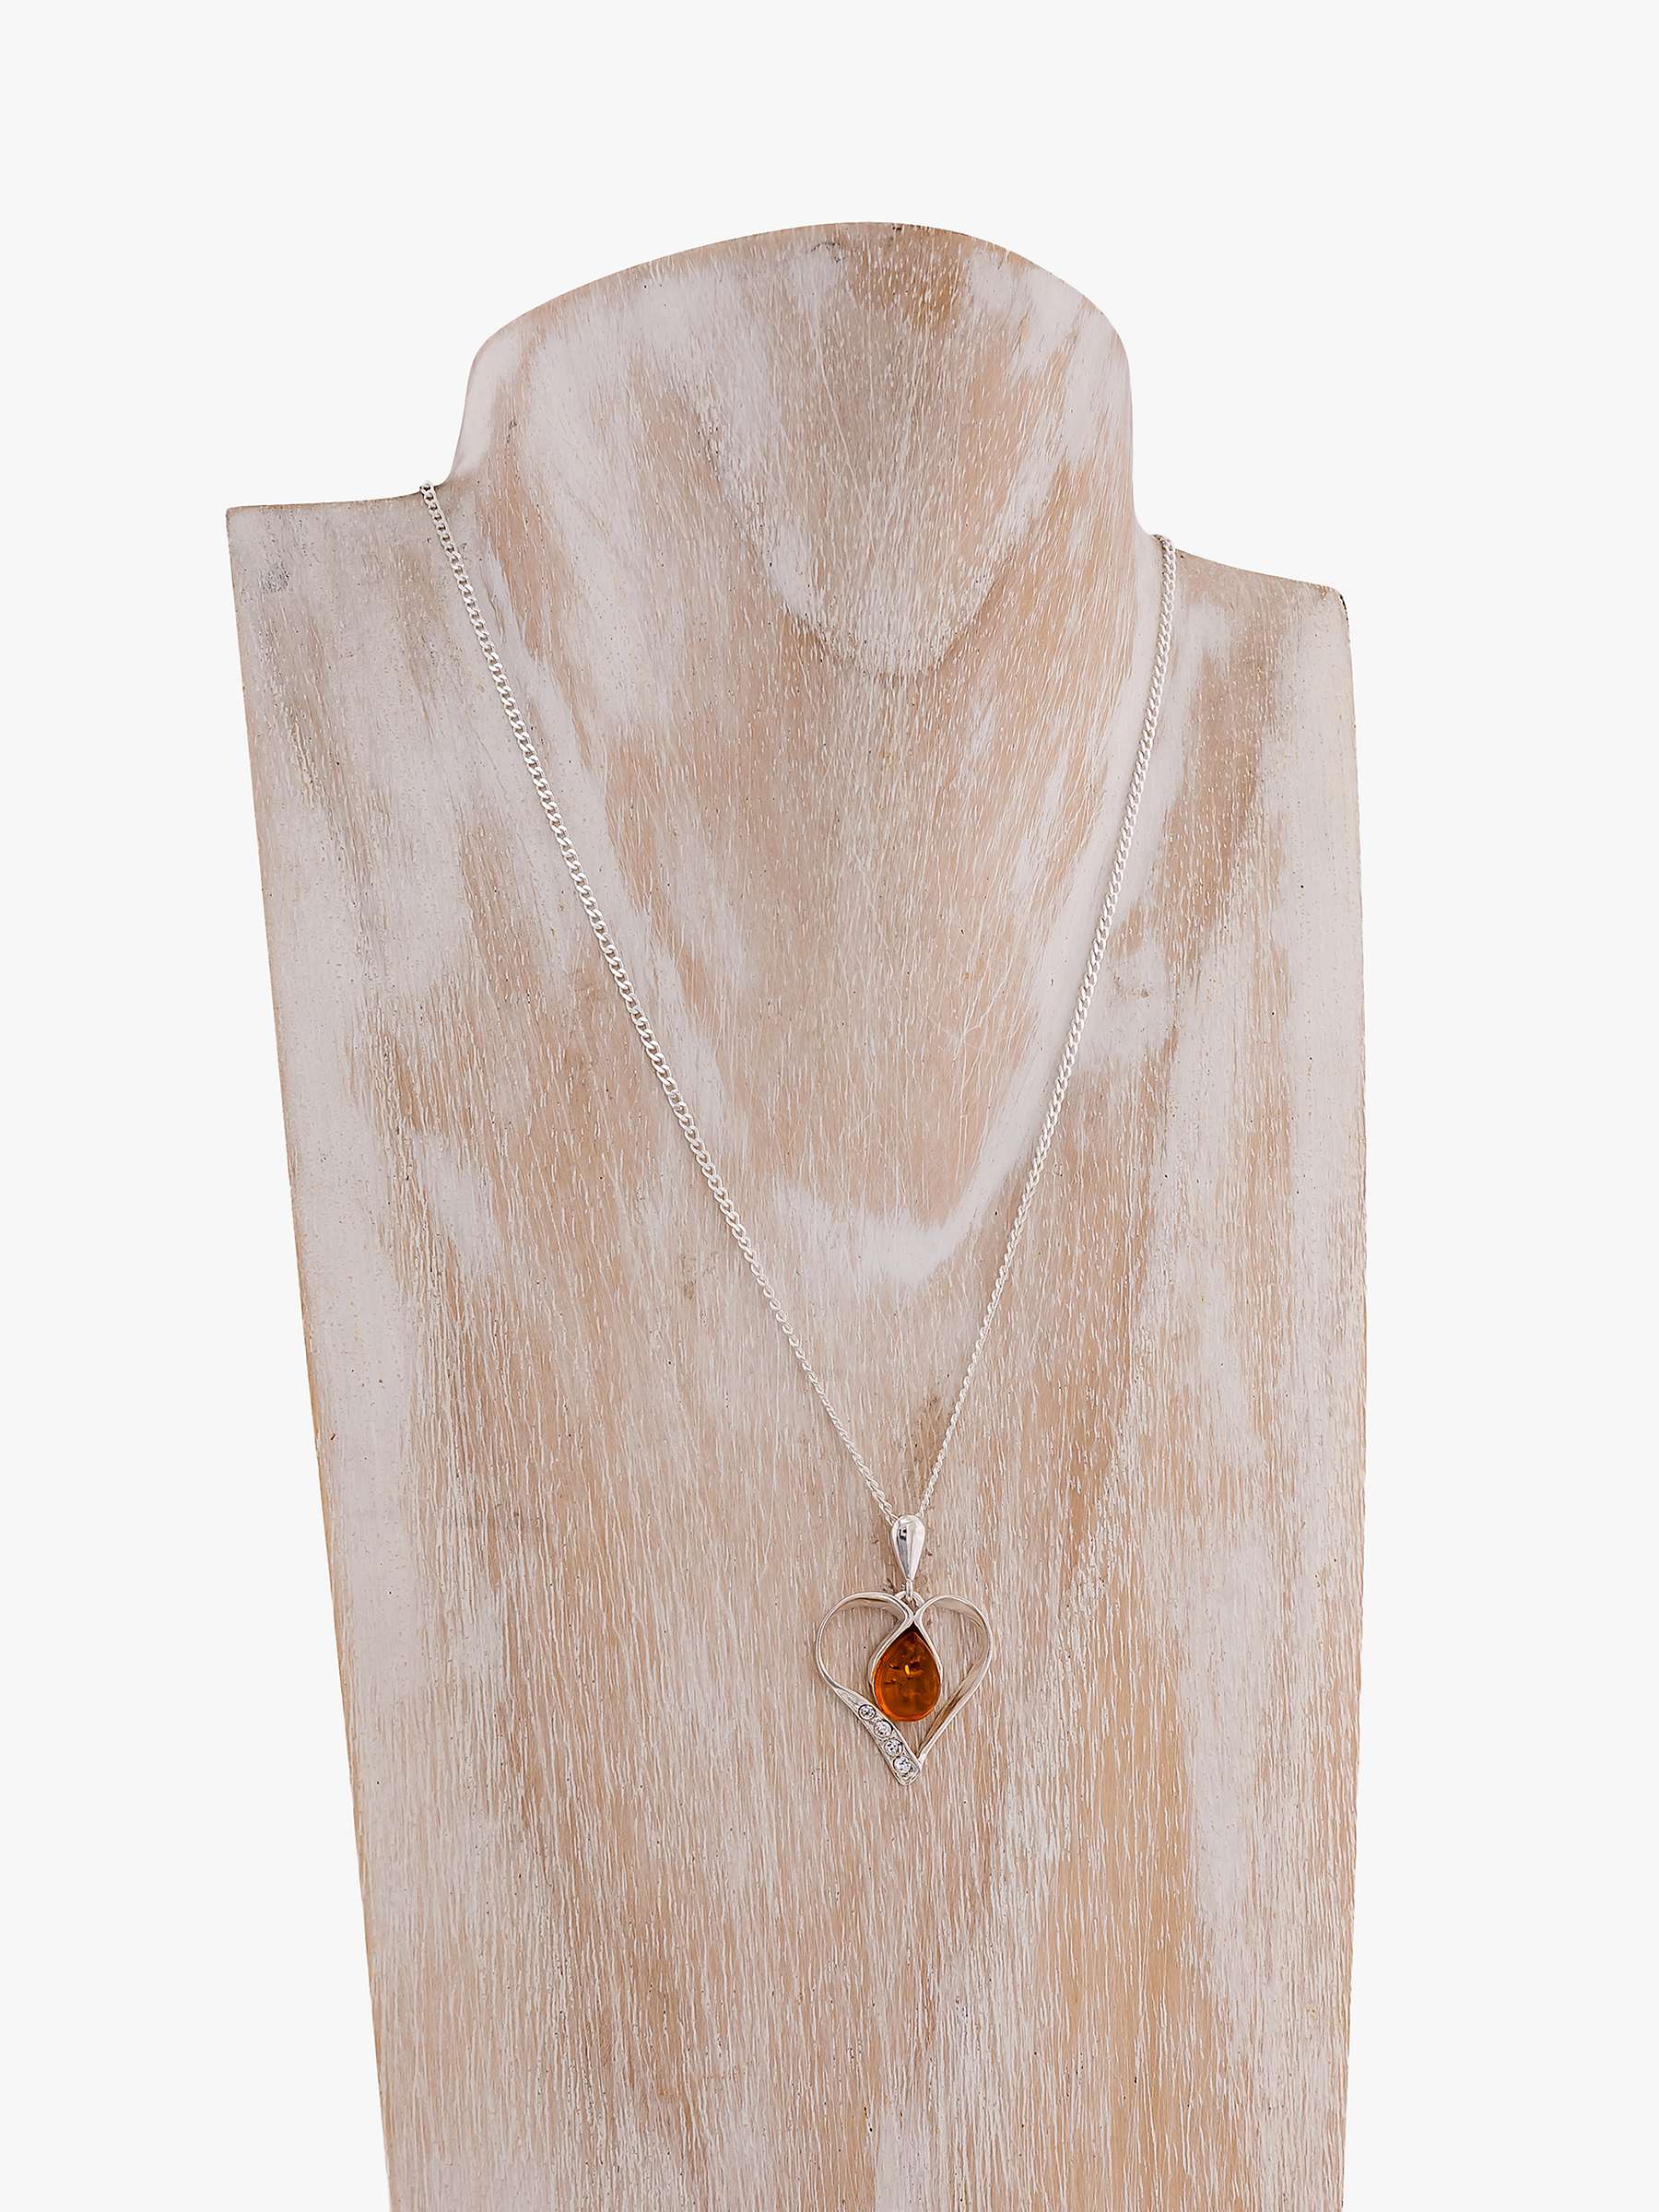 Buy Be-Jewelled Amber Cutout Heart Pendant Necklace, Silver/Cognac Online at johnlewis.com